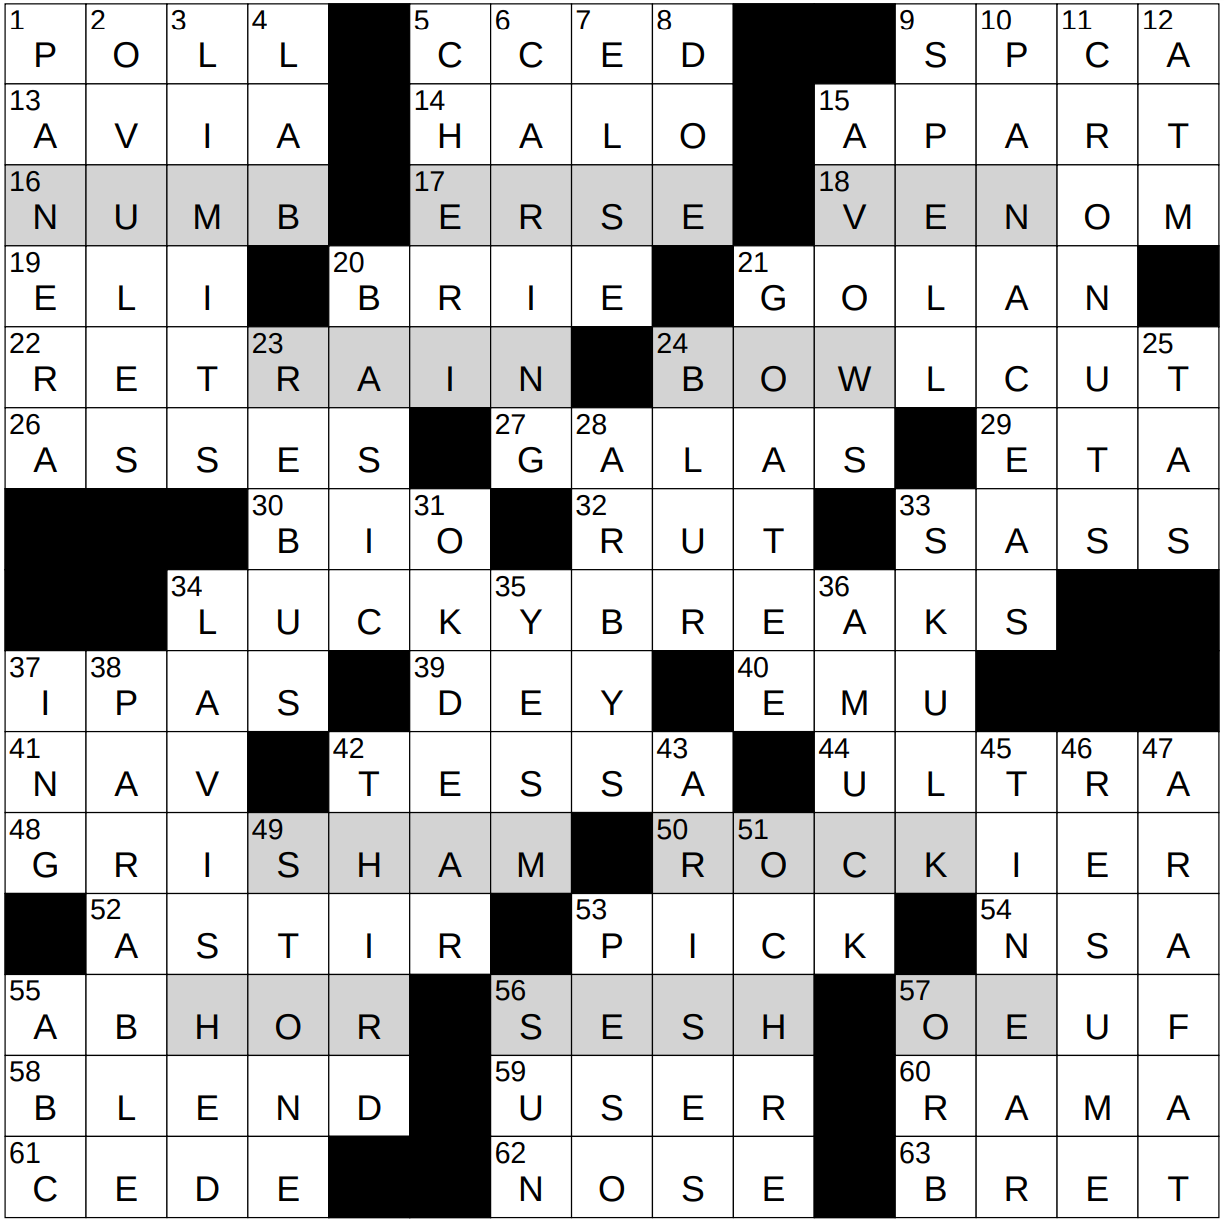 NYT's The Mini crossword answers for December 14